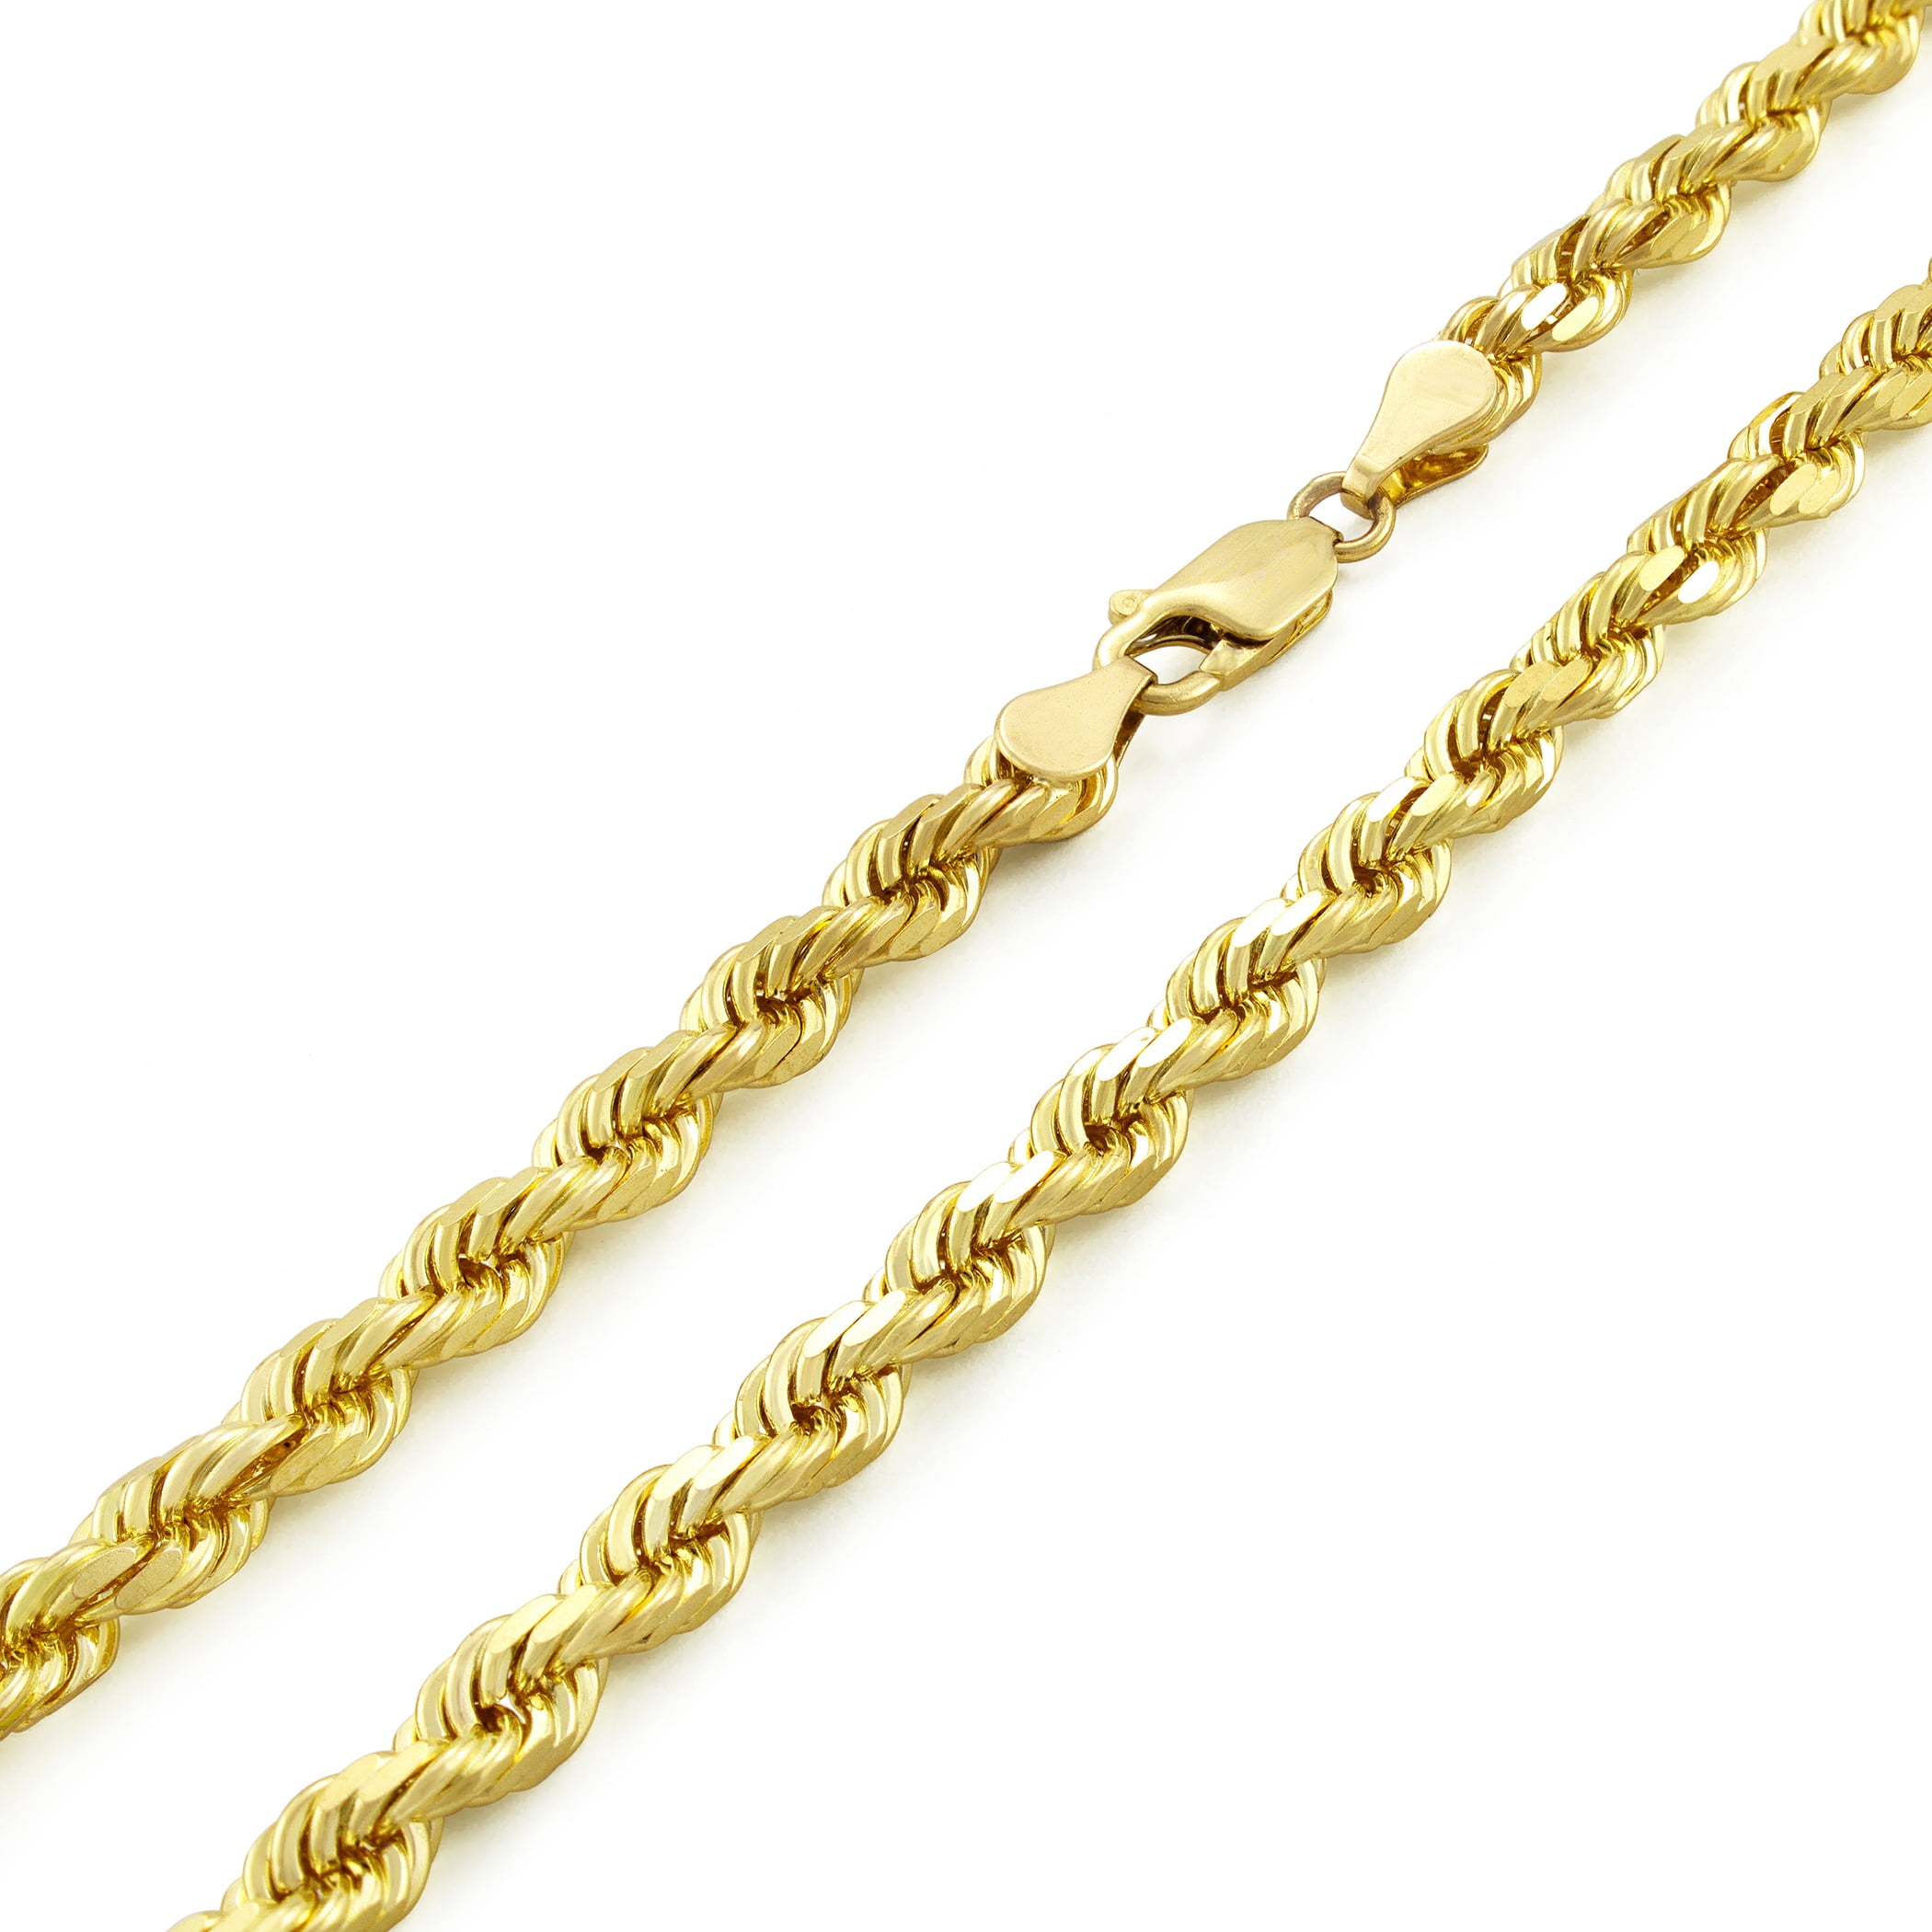 Nuragold 14k Yellow Gold 4mm Solid Rope Chain Diamond Cut Pendant Necklace,  Mens Jewelry with Lobster Clasp 18